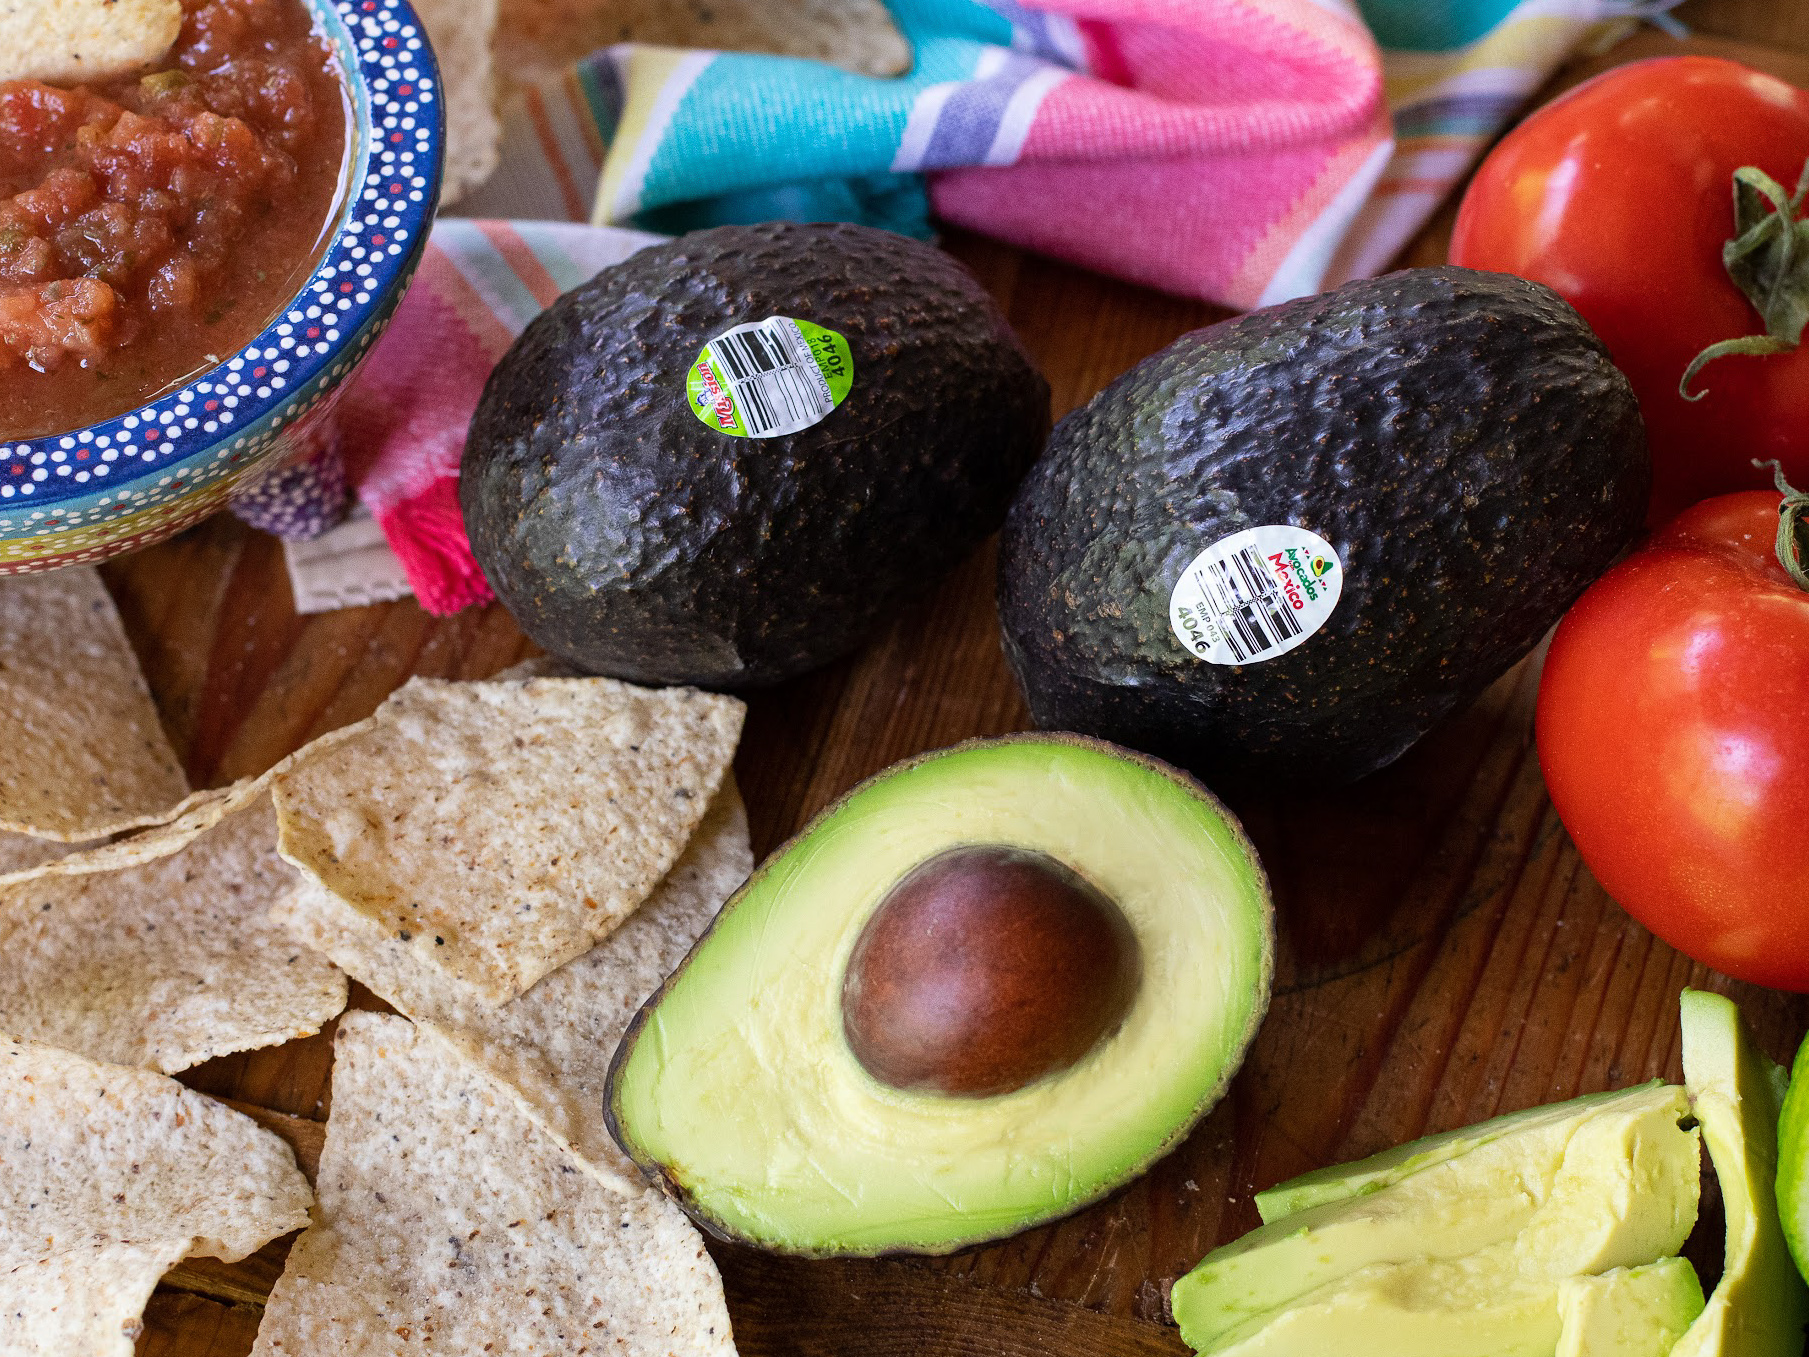 Hass Avocados As Low As $1.08 Each At Publix